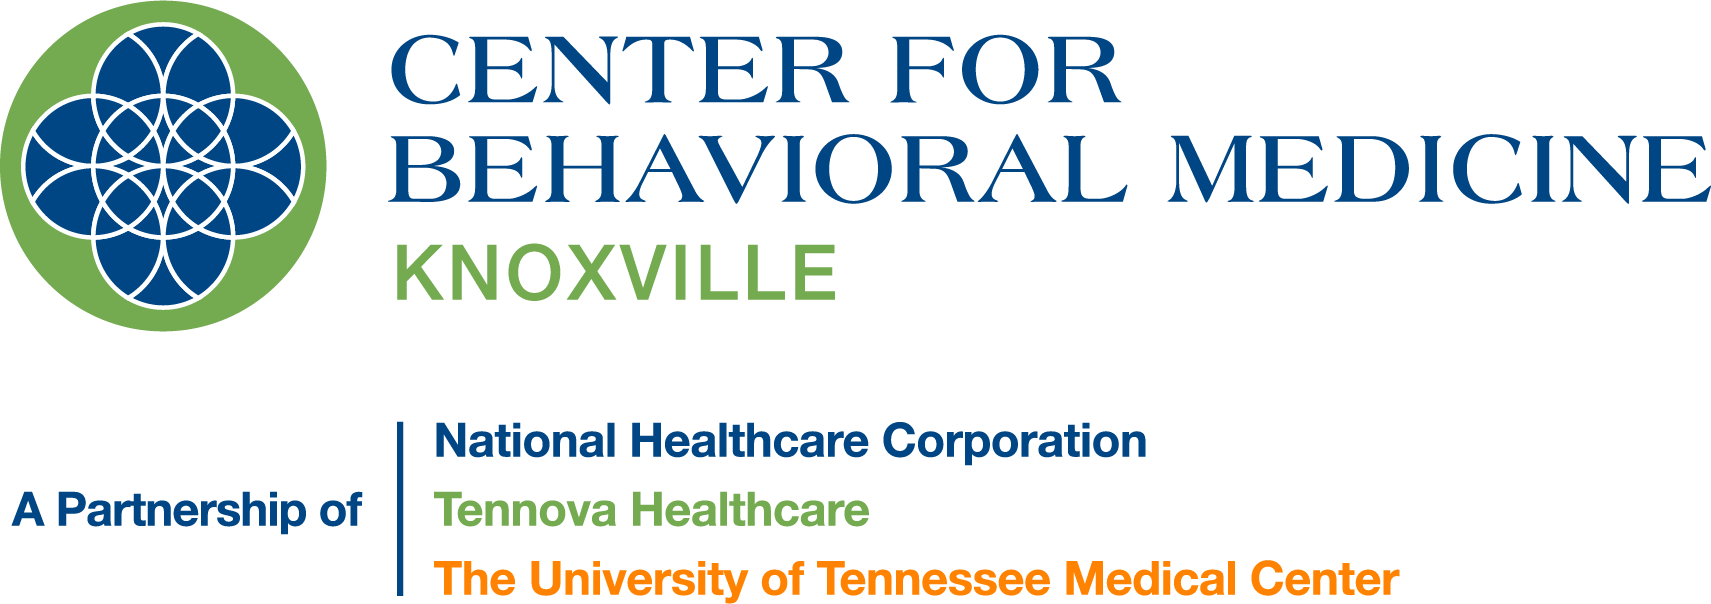 Behavioral Medicine RGB_Knoxville and Partners